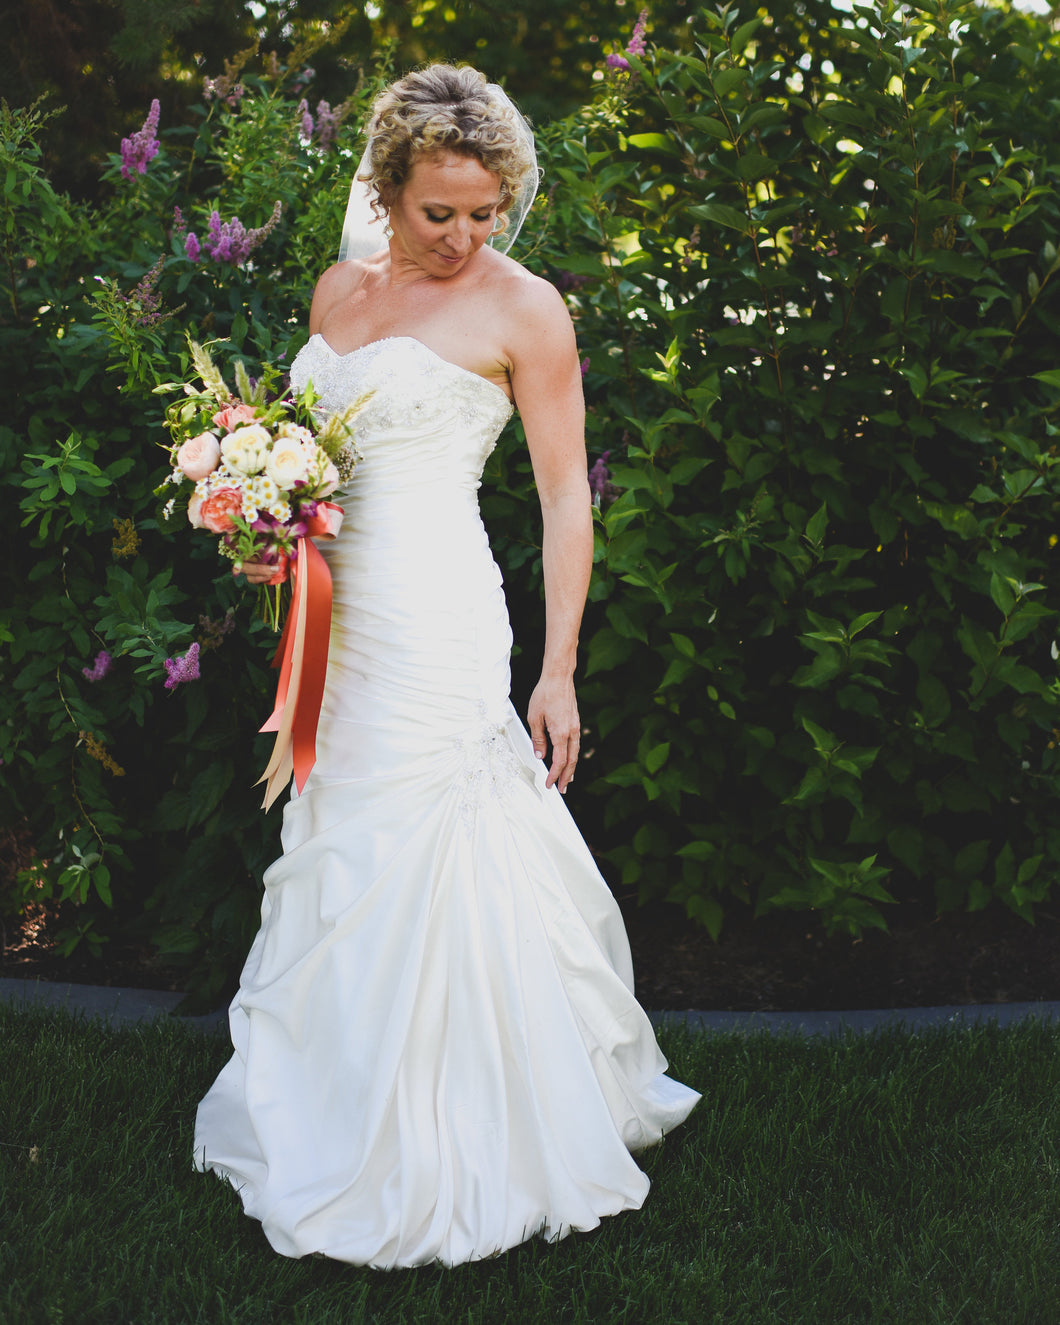 Maggie Sottero 'Strapless Satin Wrap' - Maggie Sottero - Nearly Newlywed Bridal Boutique - 1